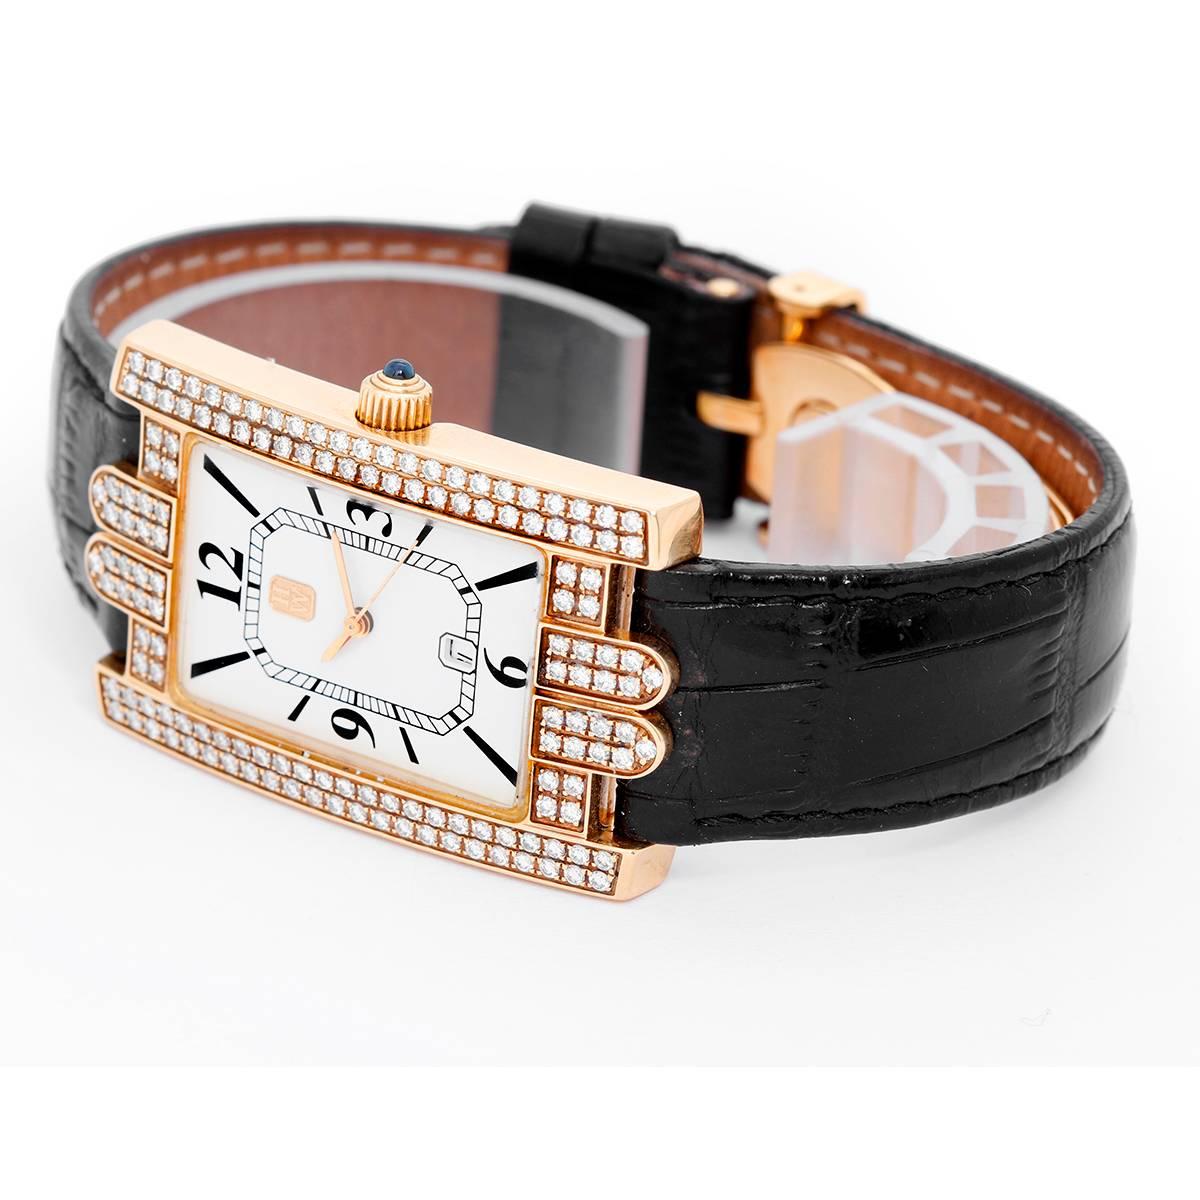 Harry Winston Avenue Classic Yellow Gold Watch -  Quartz. Yellow gold case with two rows of diamonds on bezel (38.5 mm x 27.5 mm). Enamel with Roman numerals at 3 o'clock, 9 o'clock, and 12 o'clock; Date at 6 o'clock. Black leather strap with Harry